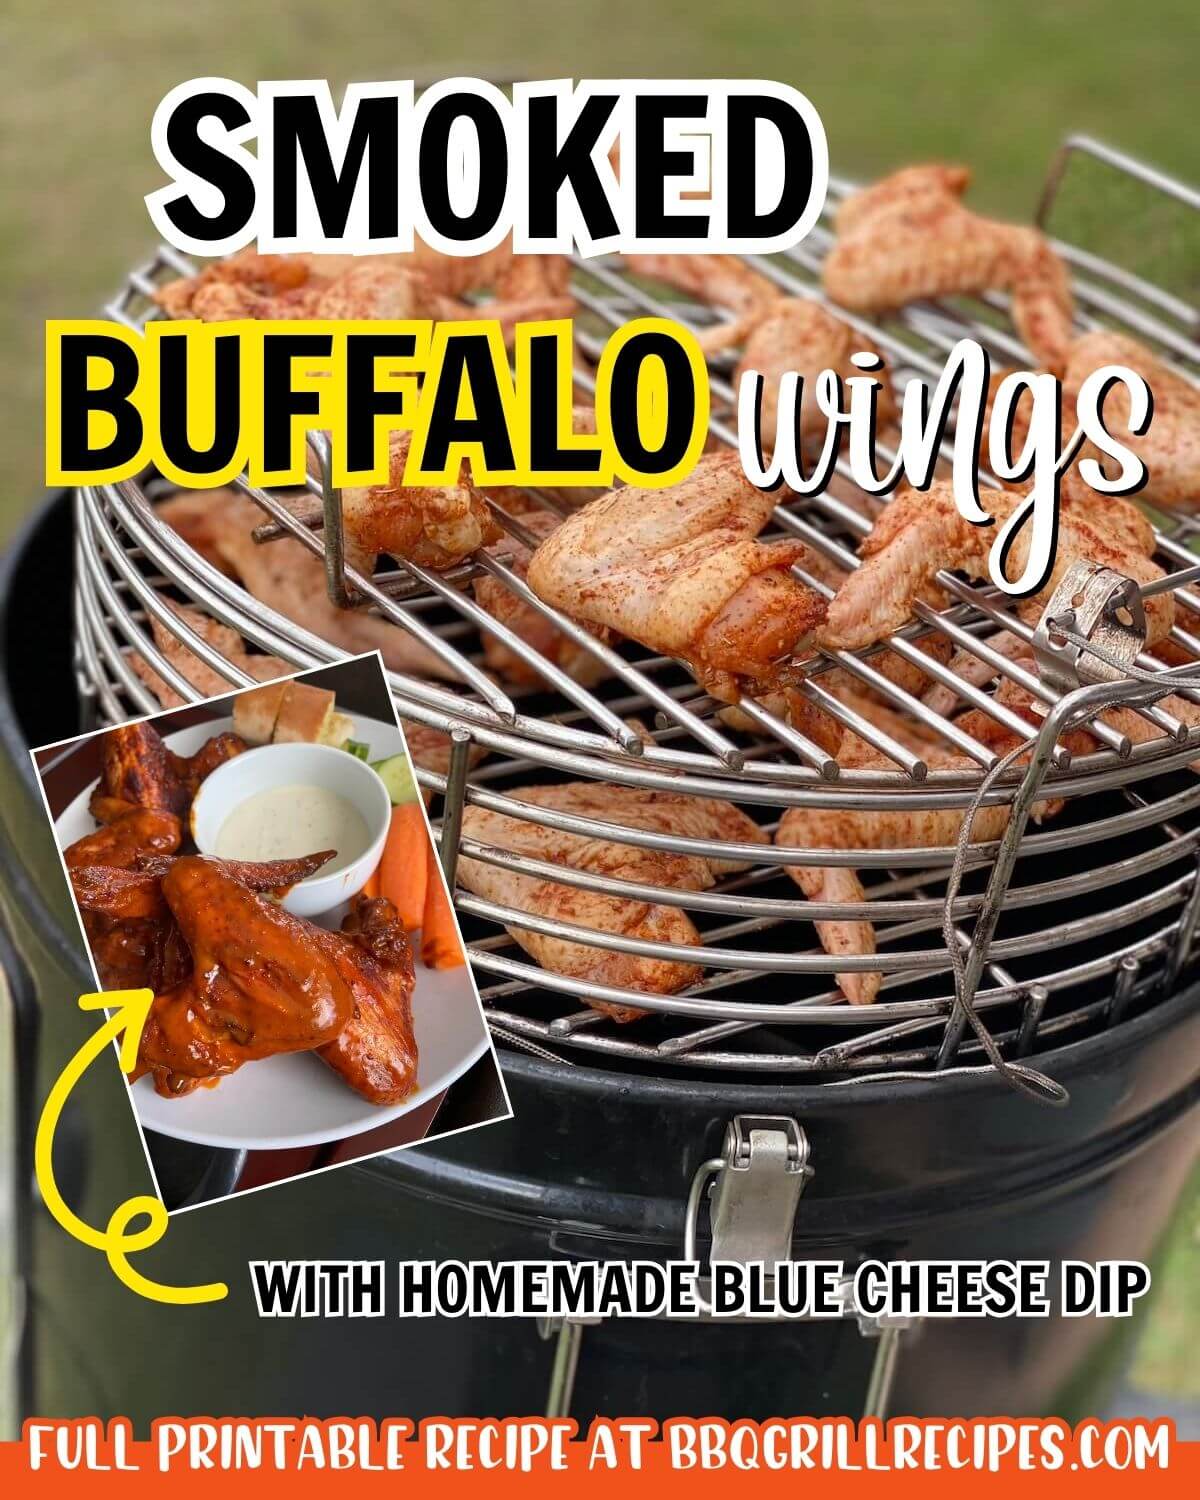 smoked buffalo wings recipe with homemade blue cheese dip and homemade meat rub.